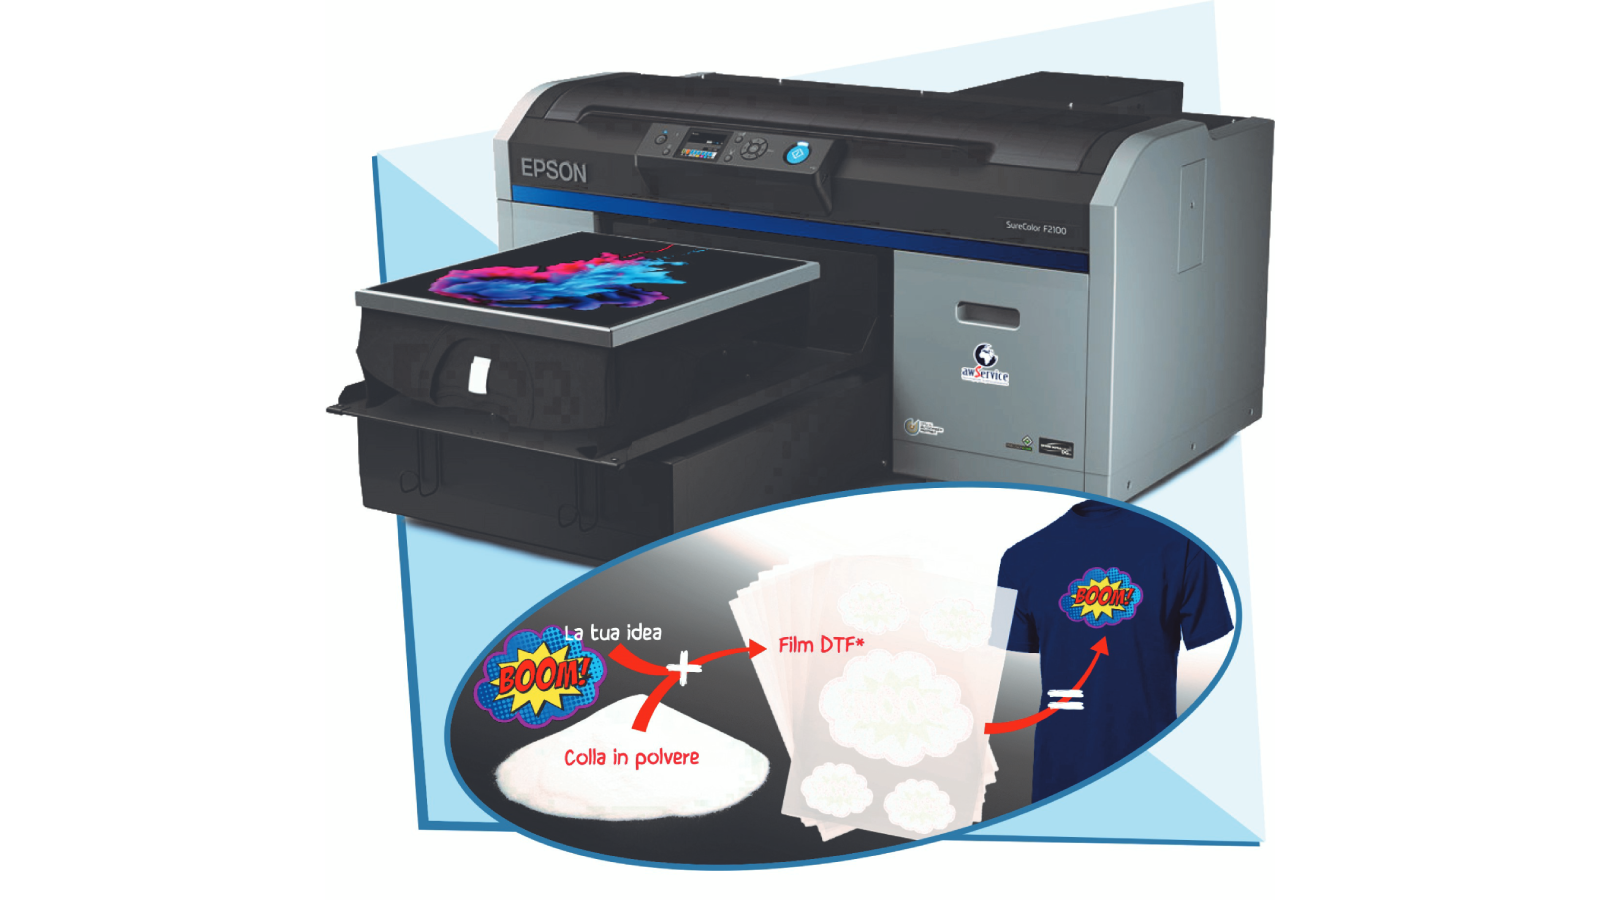 <p>Awservice's DTG solution includes the Epson SureColor Sc-F 2100 printer. Ideal for direct t-shirt printing as well as transfer paper printing on a variety of materials including fabric, wood and aluminium</p>
